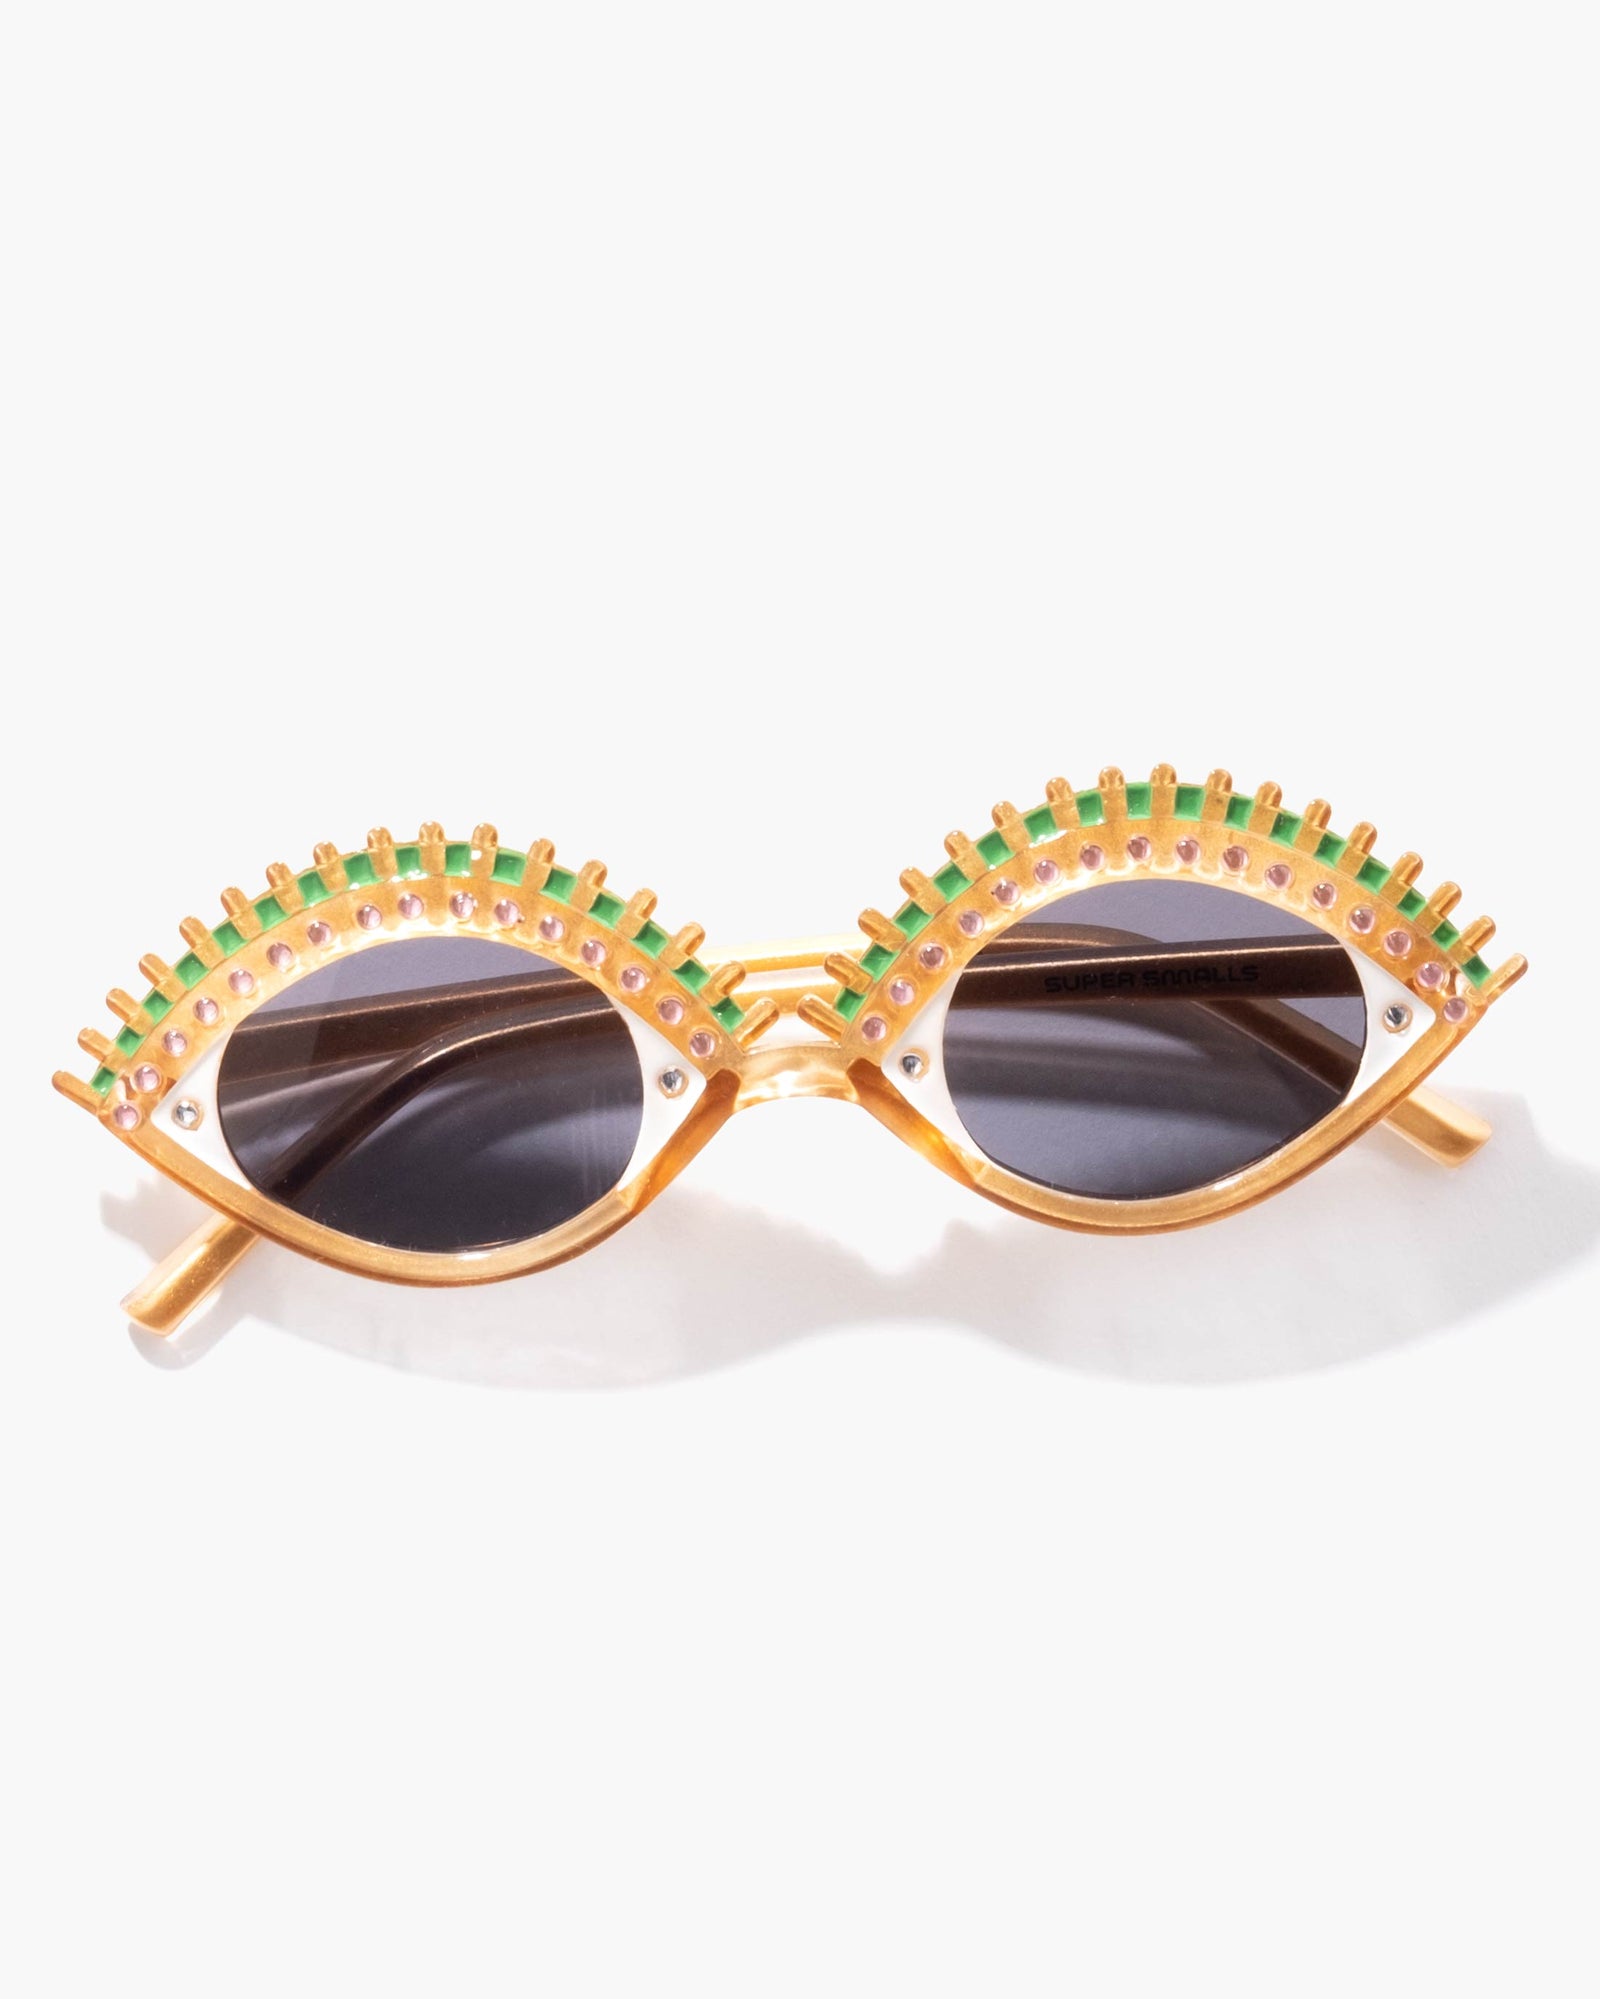 I want eye candy: Our favourite eyewear jewellery styles to shop